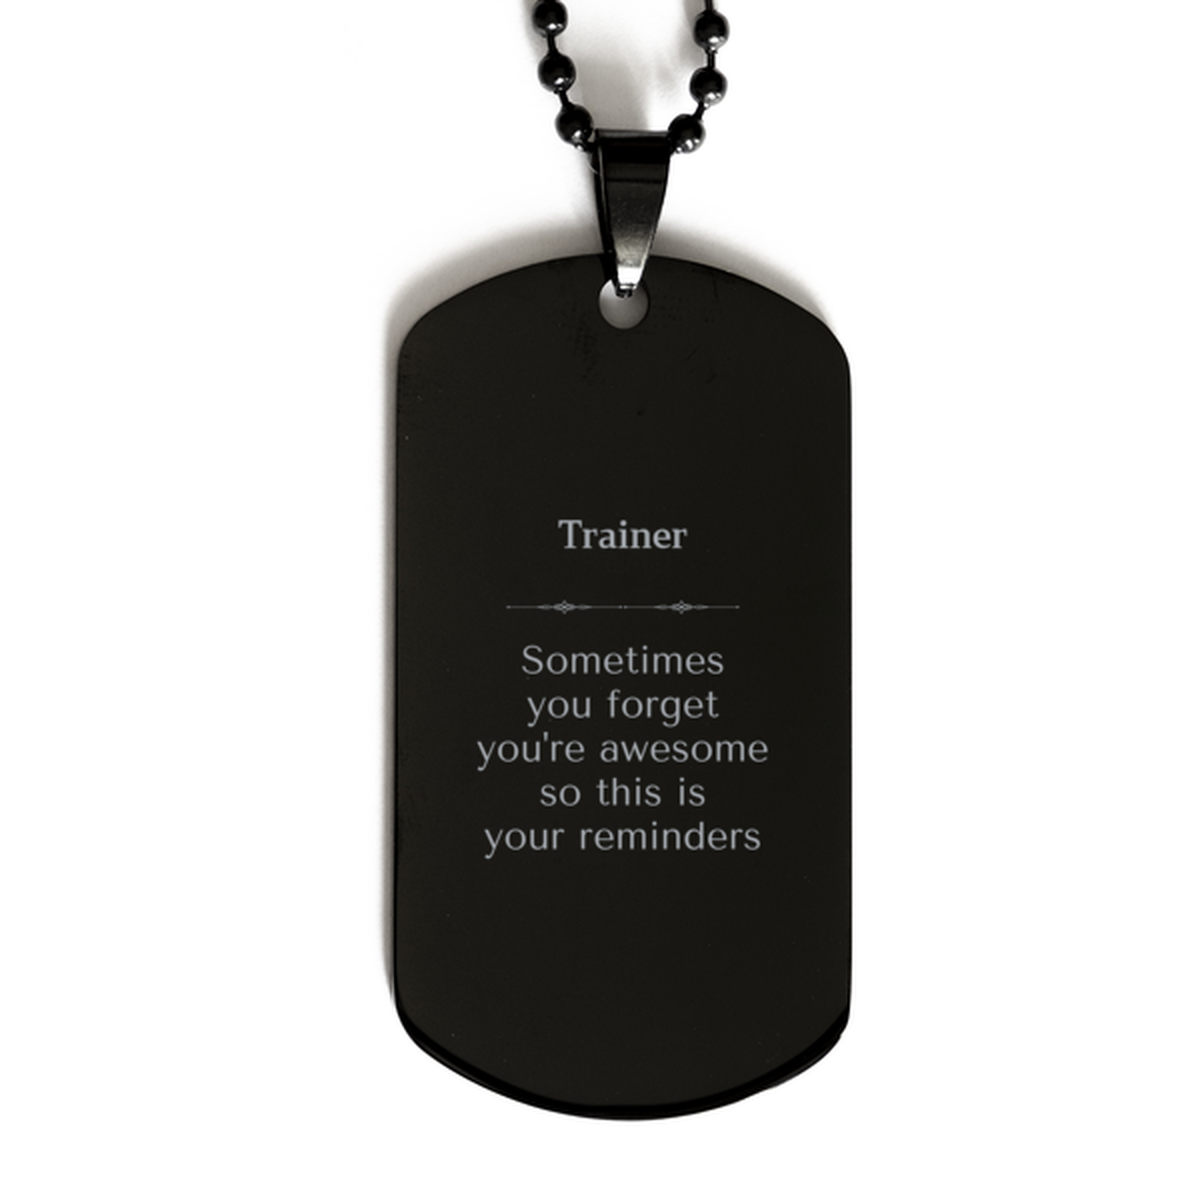 Sentimental Trainer Black Dog Tag, Trainer Sometimes you forget you're awesome so this is your reminders, Graduation Christmas Birthday Gifts for Trainer, Men, Women, Coworkers